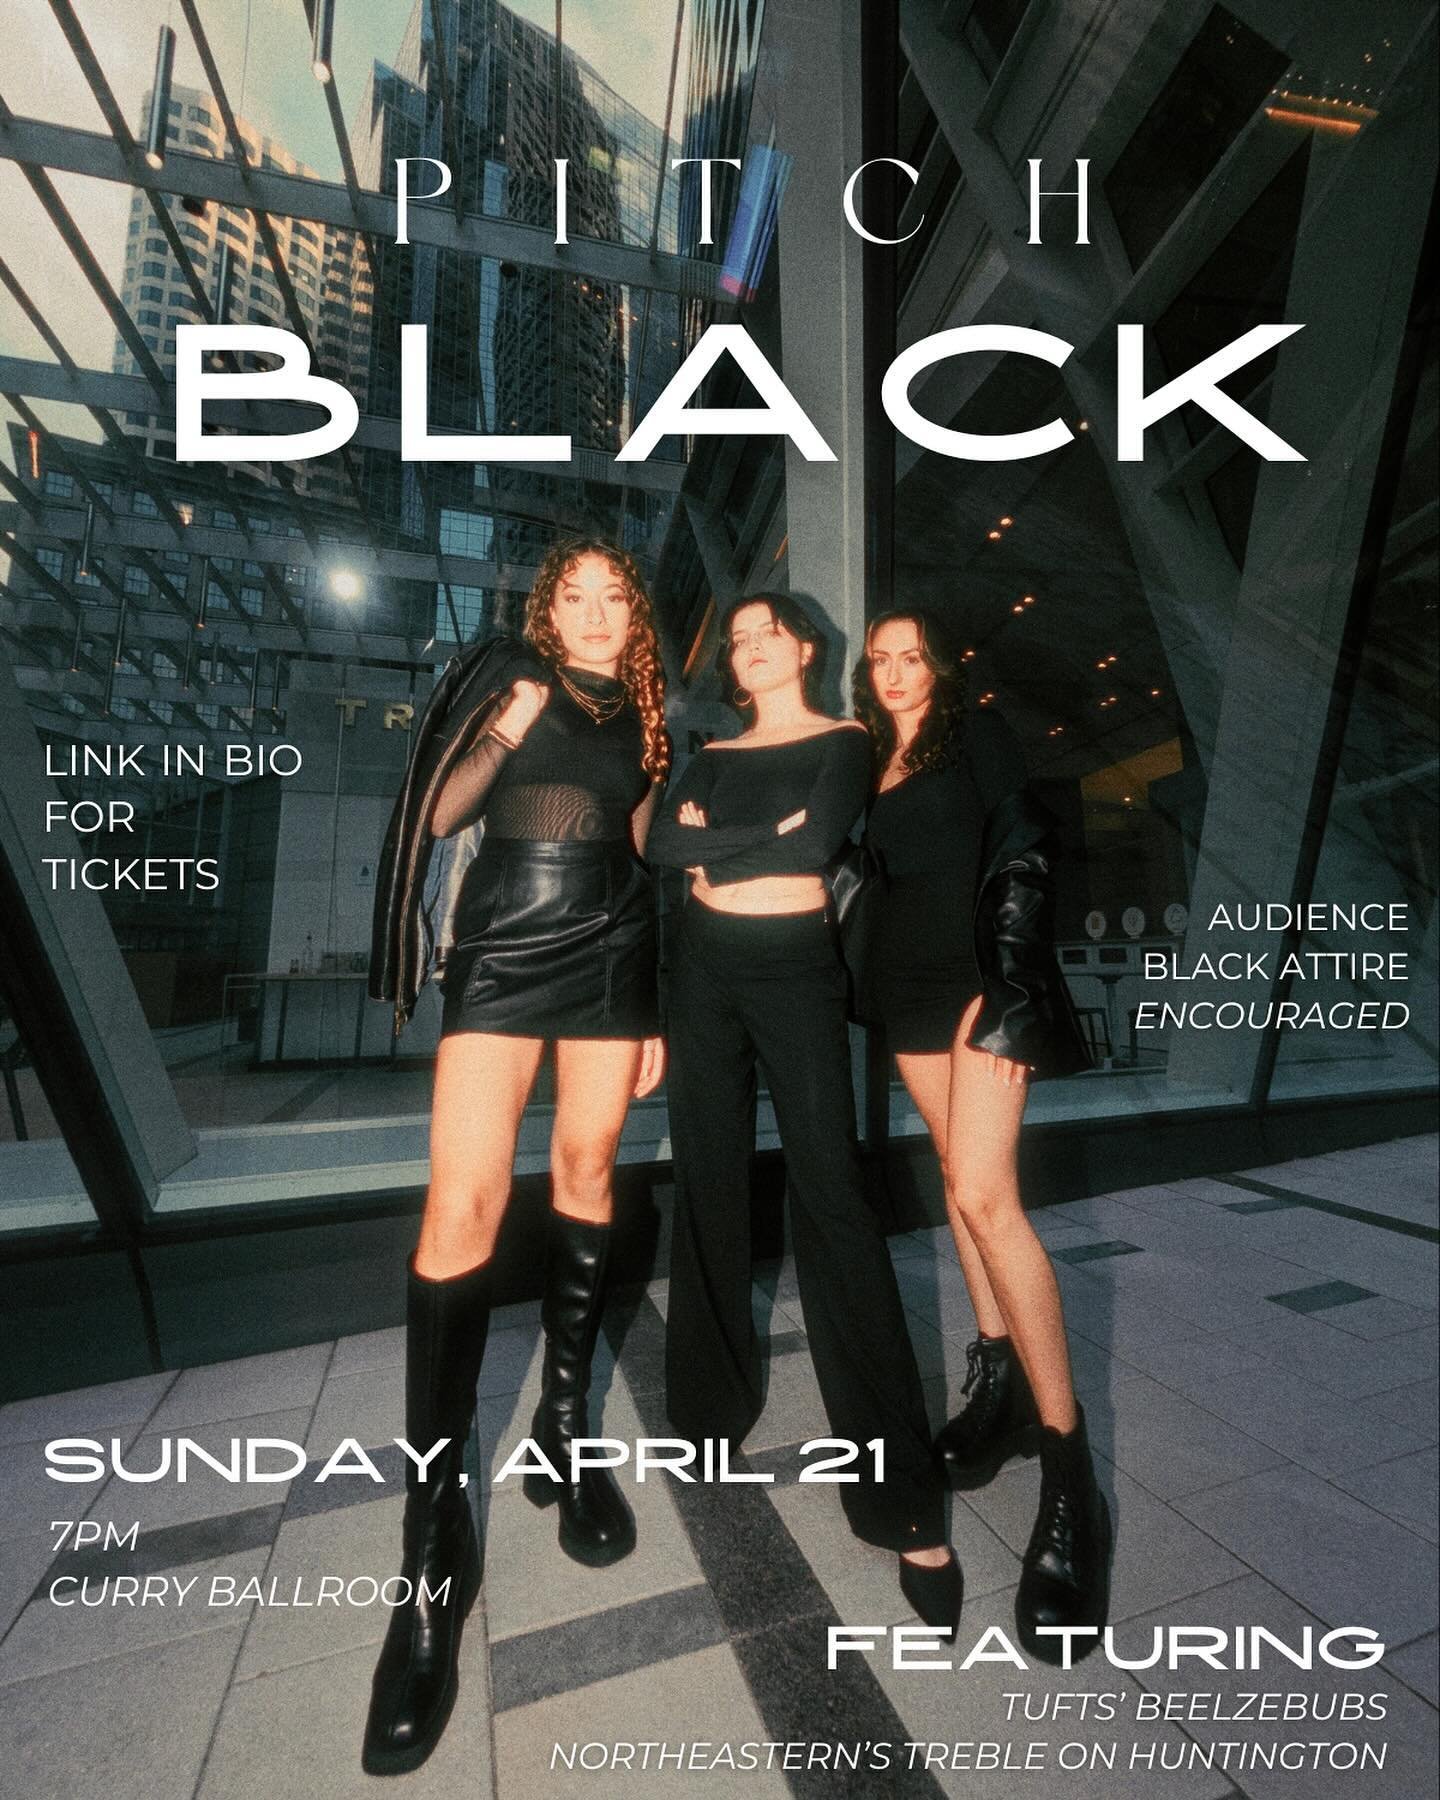 Our mezzos can&rsquo;t wait to see you this Sunday at Pitch Black!

Tickets were SOLD OUT, but&hellip; MORE HAVE BEEN ADDED!! Click the link in our bio to get tickets! 🖤

Once you click the link, select &ldquo;promotions&rdquo; and then type in the 